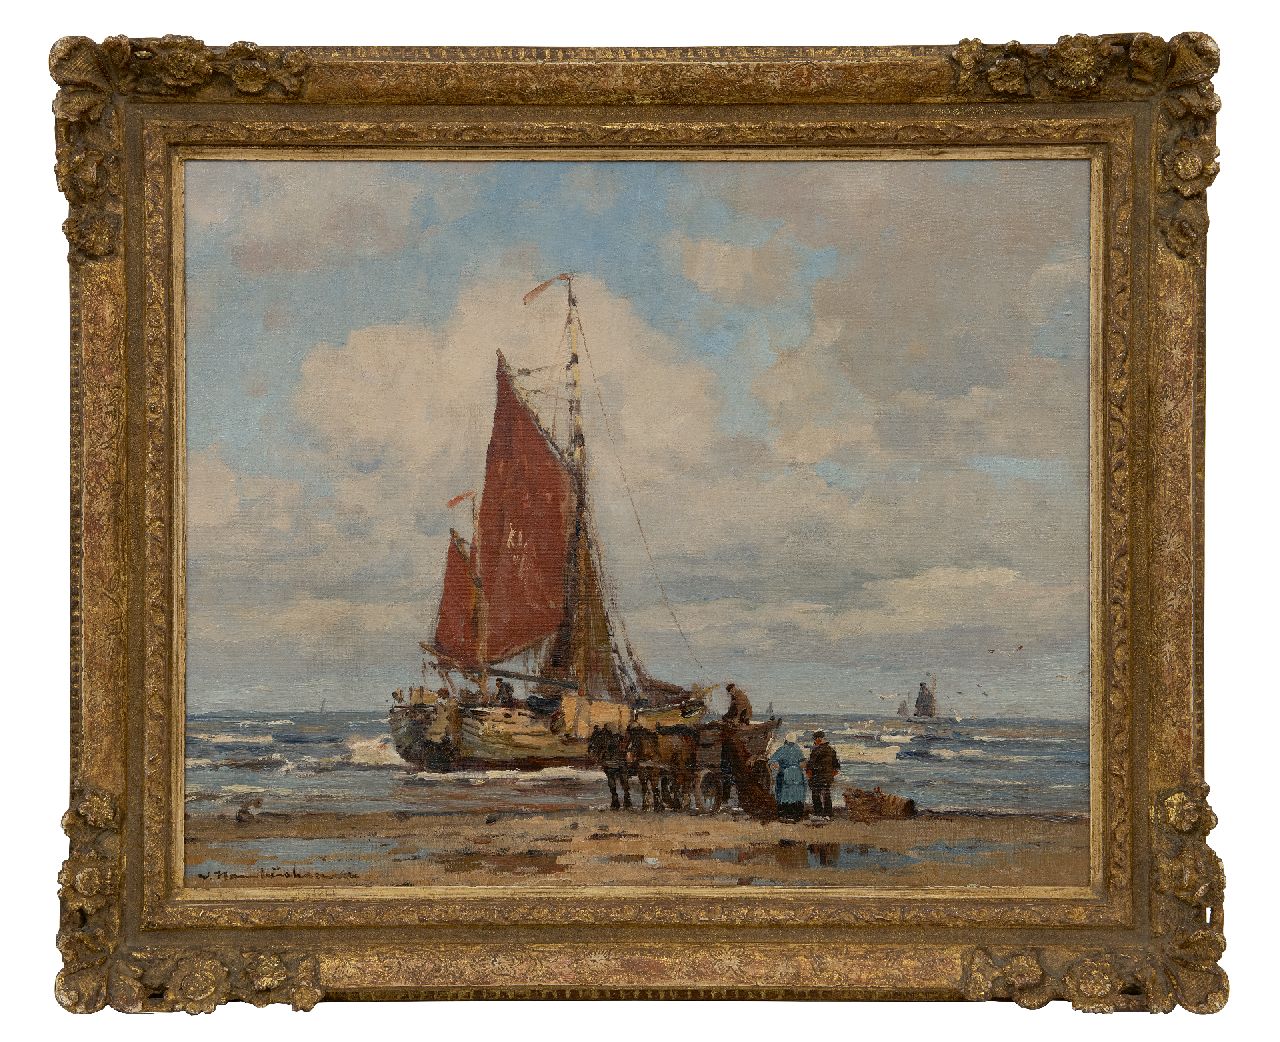 Hambüchen W.  | Wilhelm Hambüchen | Paintings offered for sale | Fishing vessel in the surf, Katwijk, oil on canvas 50.0 x 60.5 cm, signed l.l.